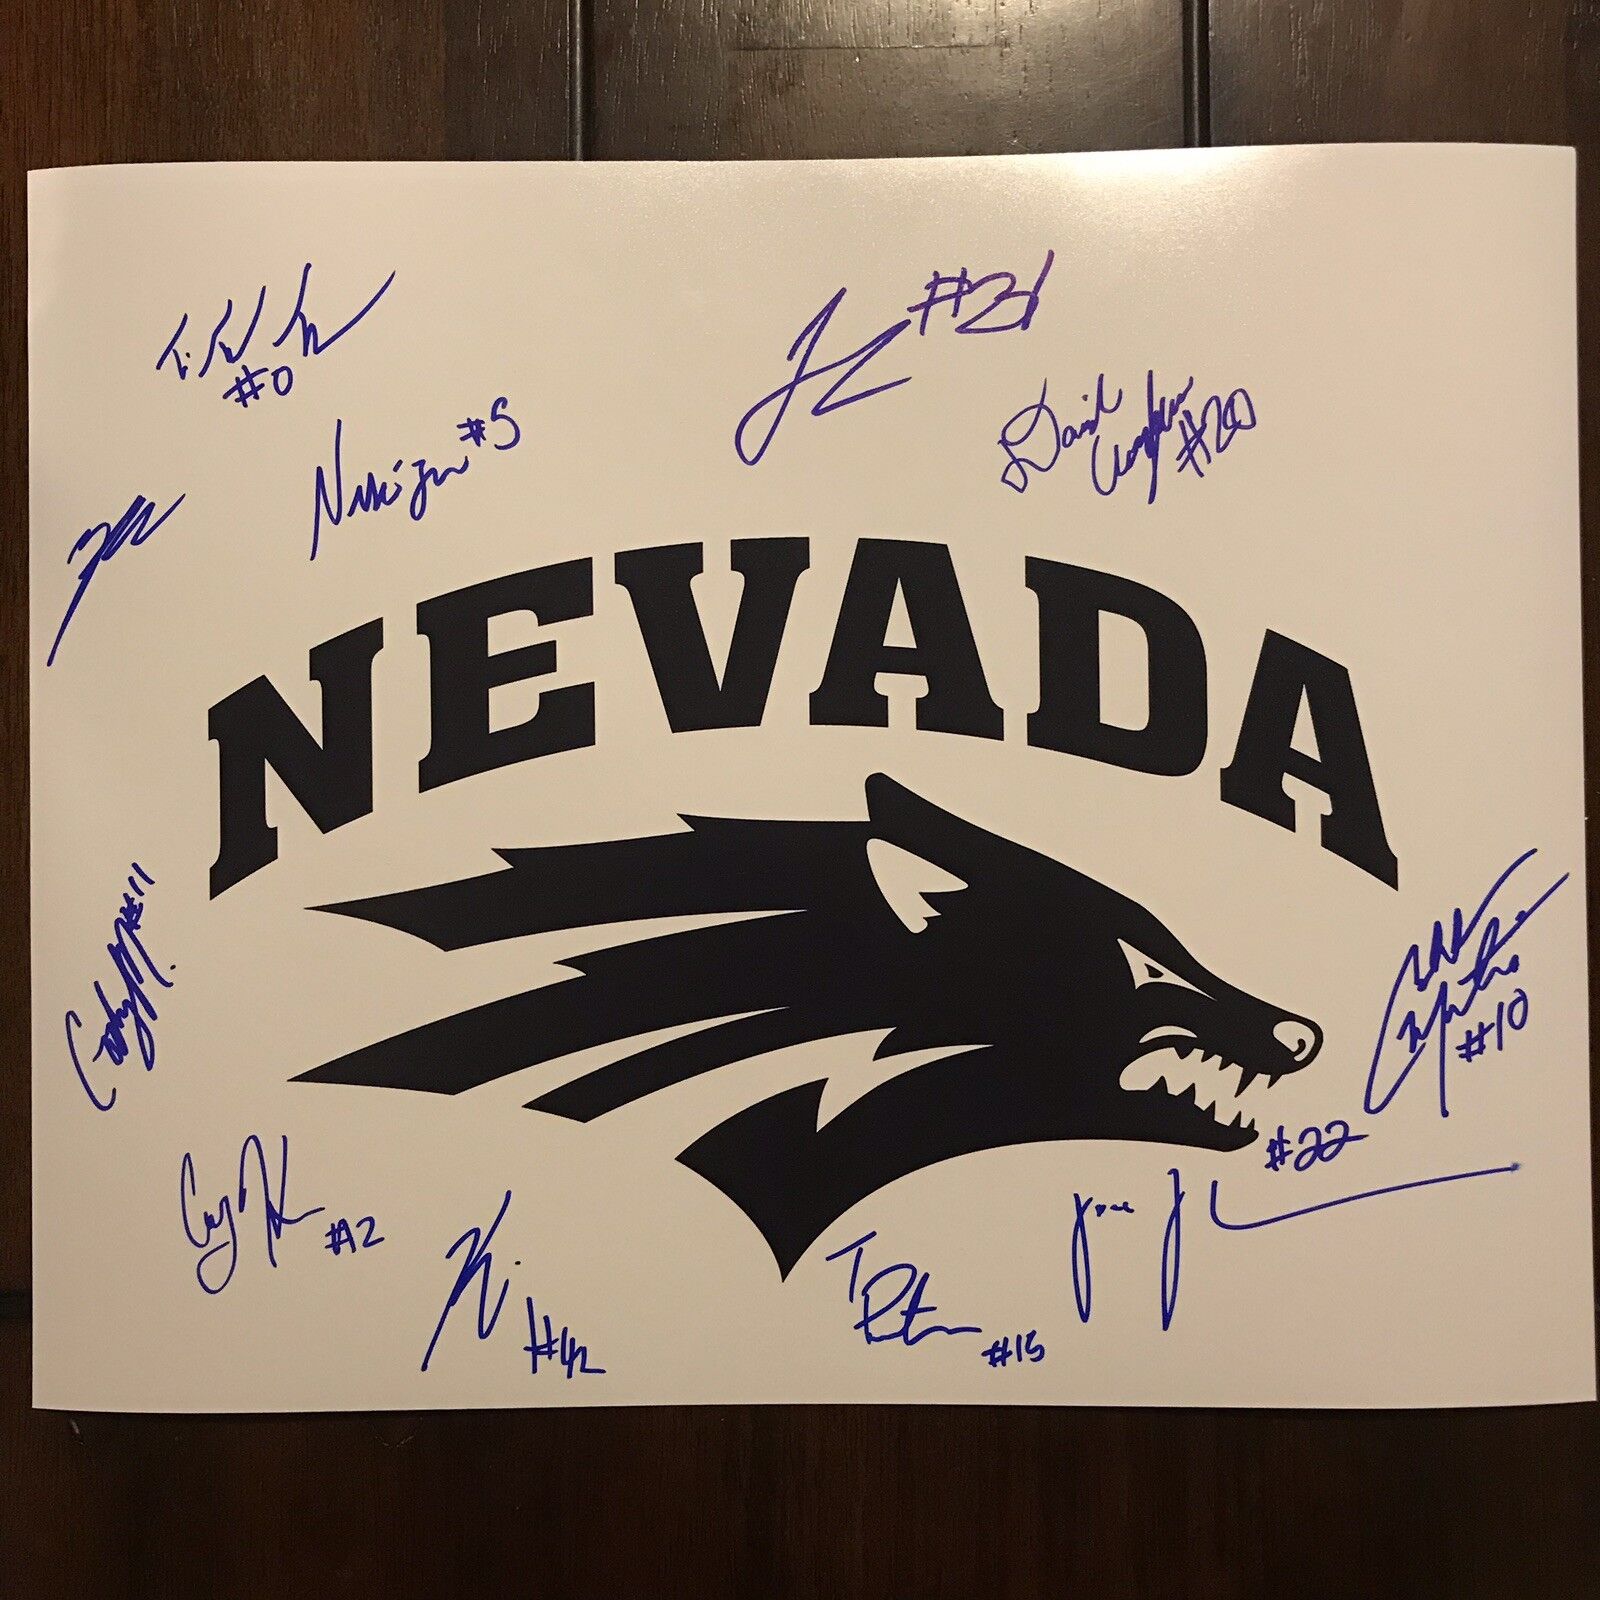 2018-19 NEVEDA WOLF PACK Basketball Team Signed Autographed 11x14 Photo Poster painting UNR COA